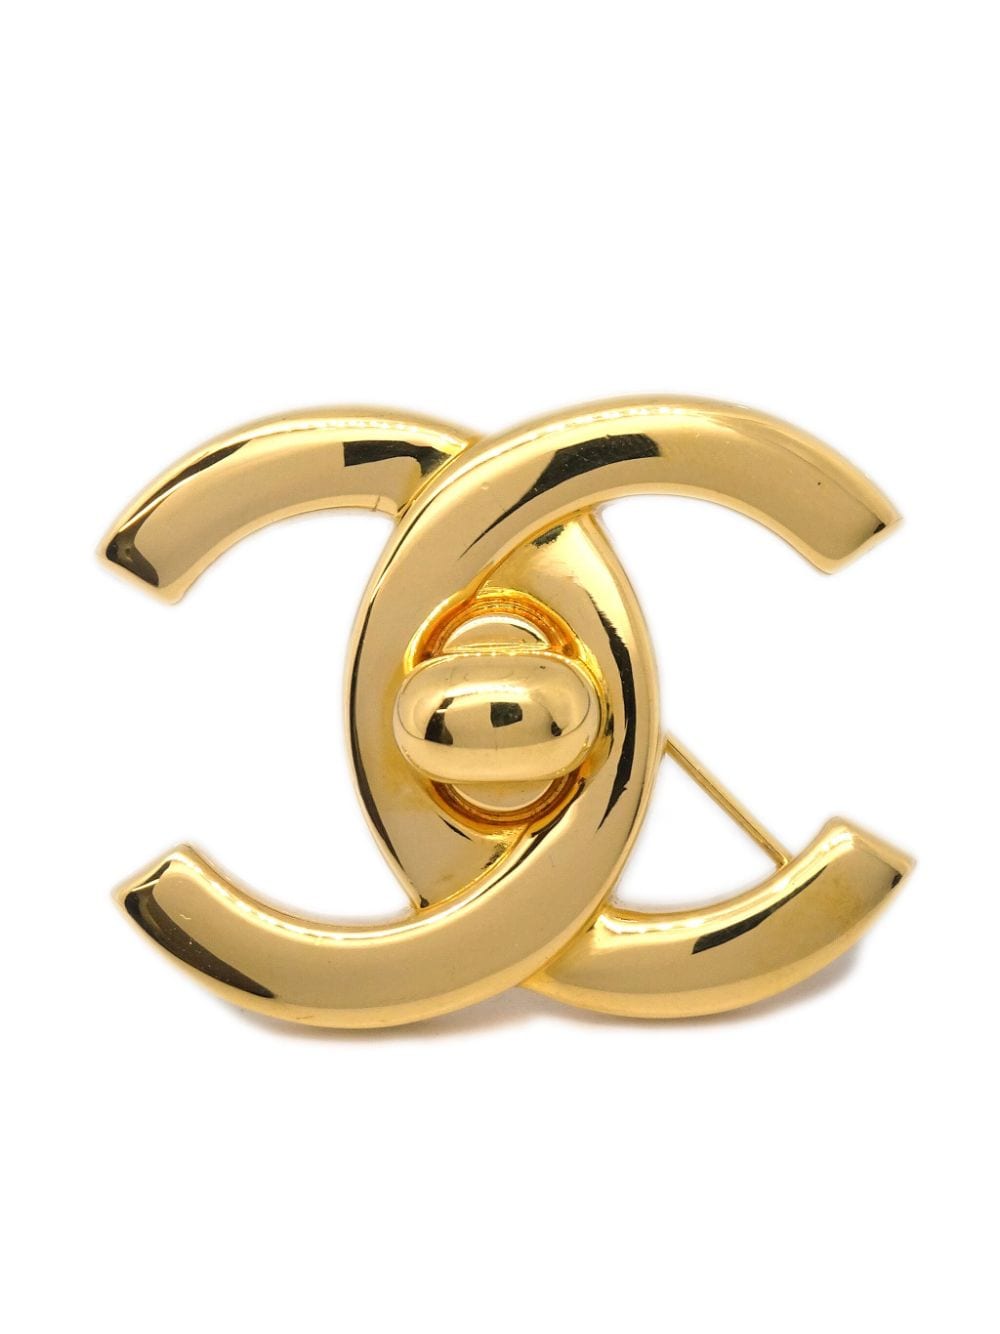 Pre-owned Chanel Cc 旋扣胸针（1996年典藏款） In Gold